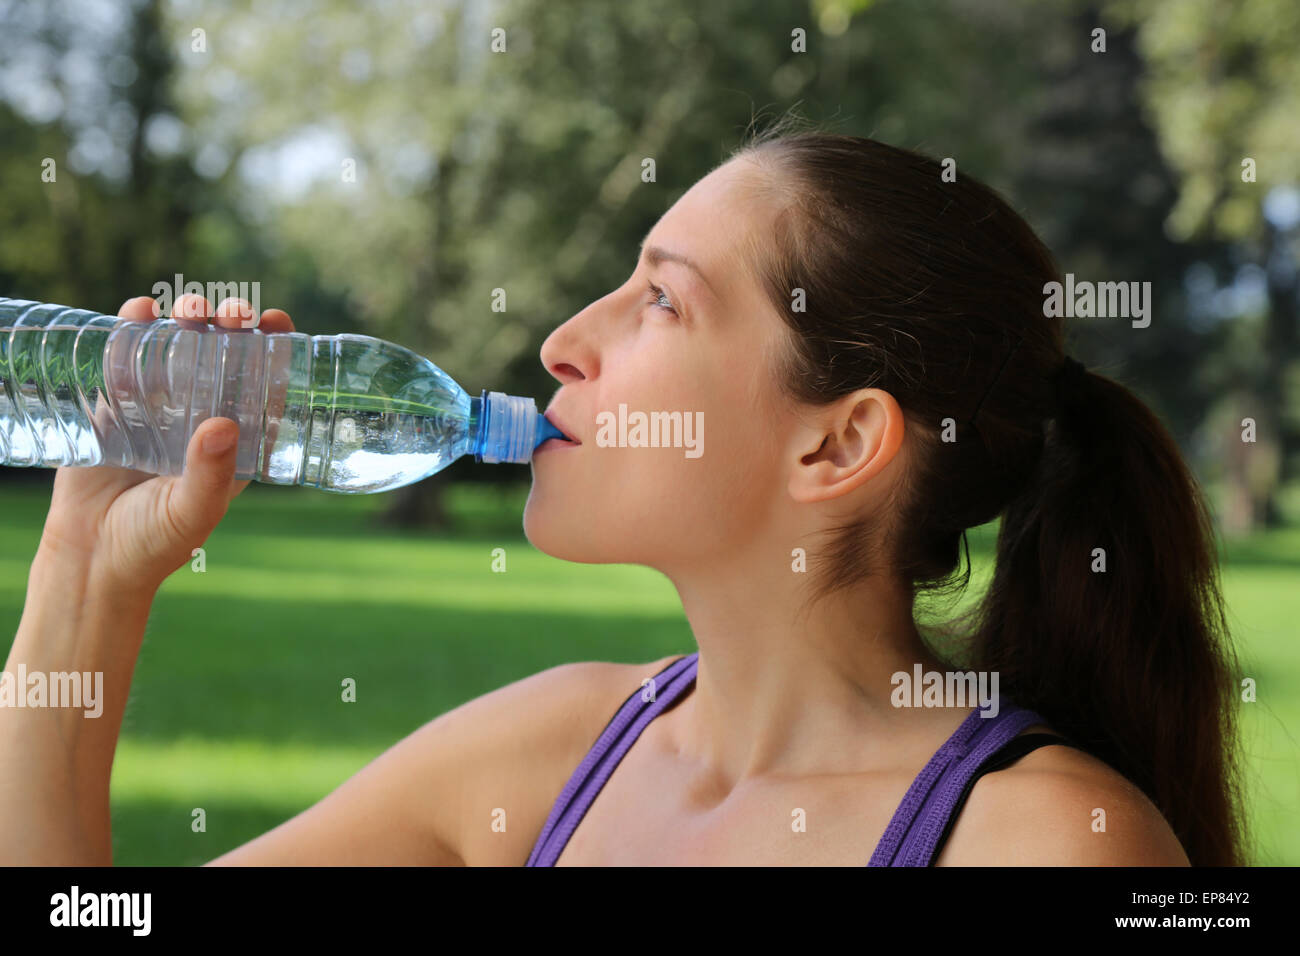 Sport Trinken Flasche High Resolution Stock Photography and Images - Alamy